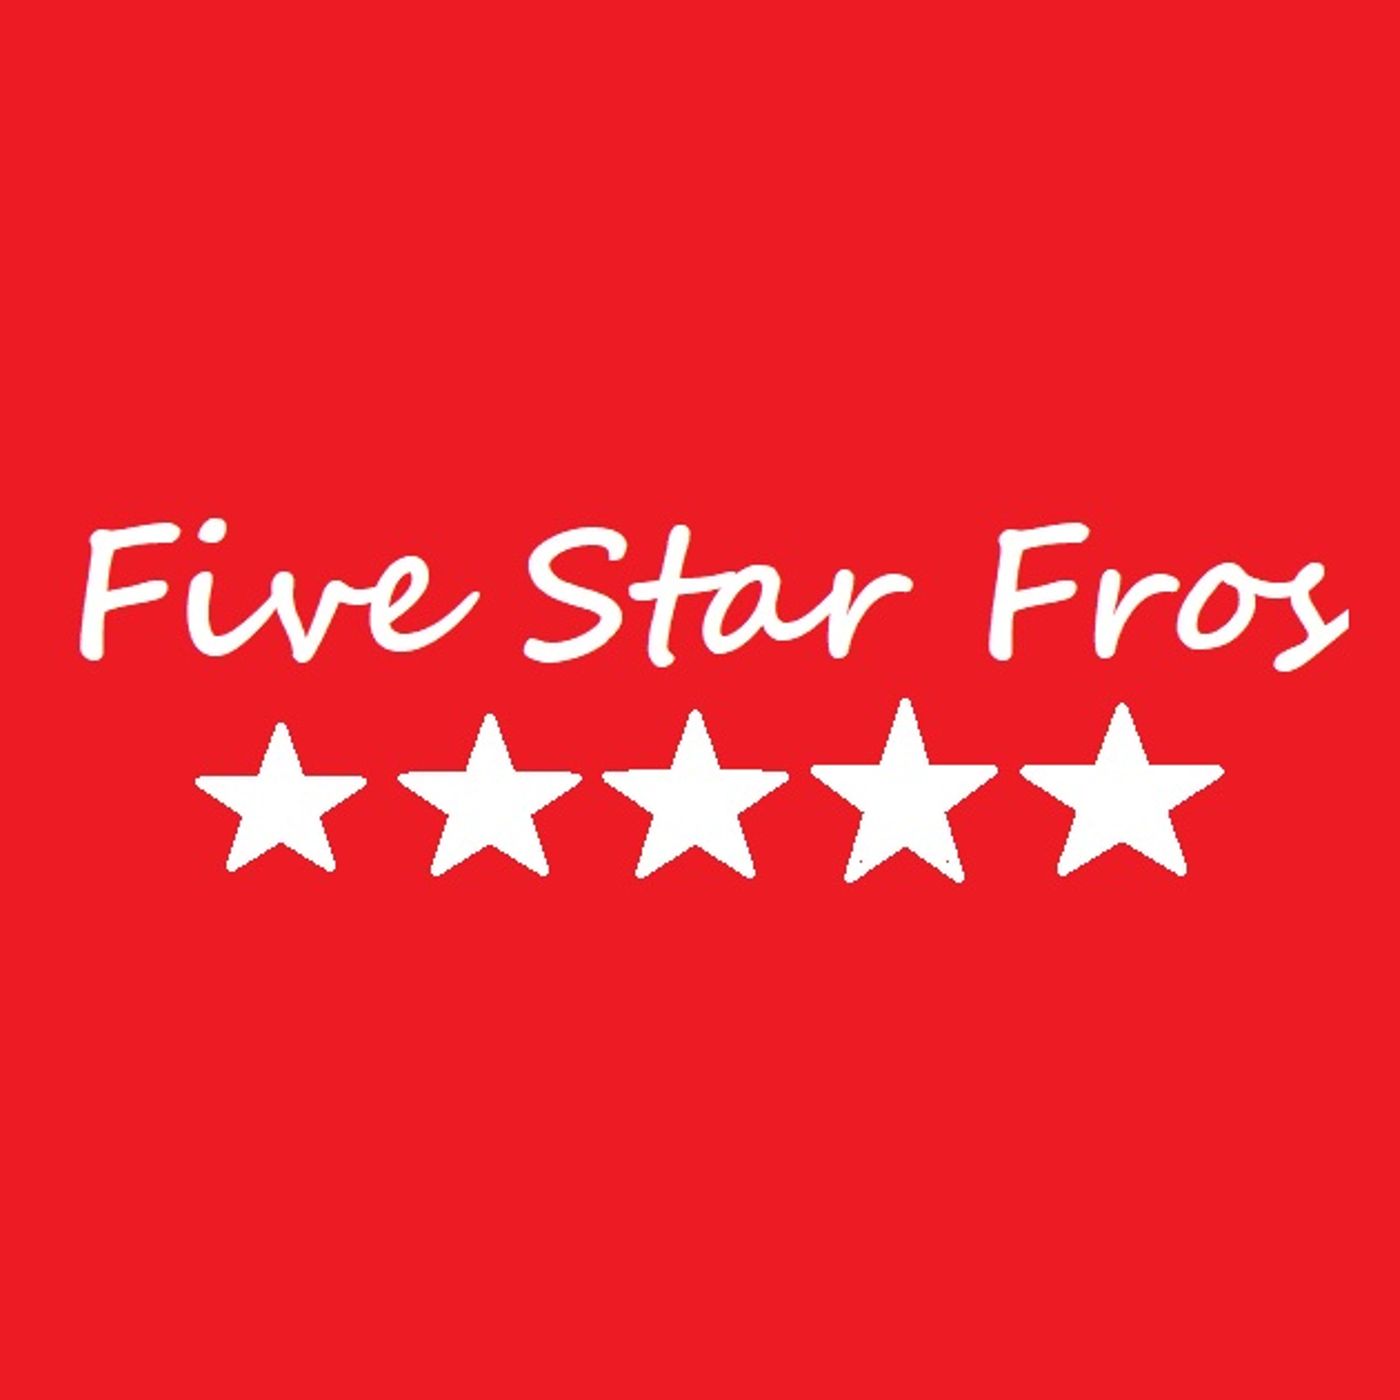 Five Star Fros